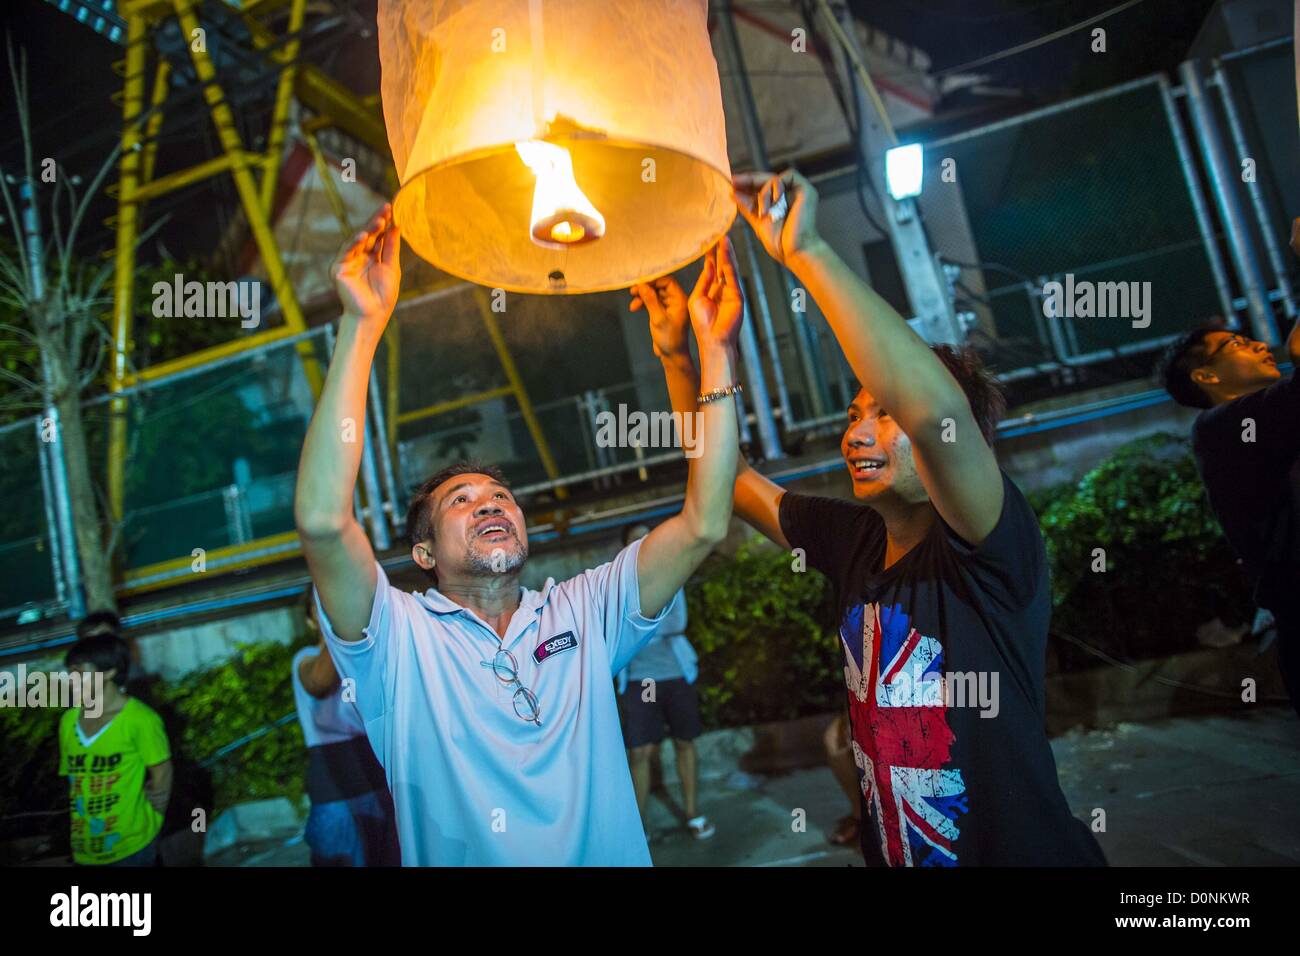 Nov. 28, 2012 - Bangkok, Thailand - People try to light a Khom Loi lantern  during Loy Krathong at Wat Yannawa in Bangkok. The lanterns are a part of the Loy Krathong tradition in northern Thailand, and are becoming popular in Bangkok. But authorities don't allow their use in Bangkok because of the fire danger. They try to stop people from launching the lanterns in Bangkok. Loy Krathong takes place on the evening of the full moon of the 12th month in the traditional Thai lunar calendar. In the western calendar this usually falls in November. Loy means 'to float', while krathong refers to the u Stock Photo